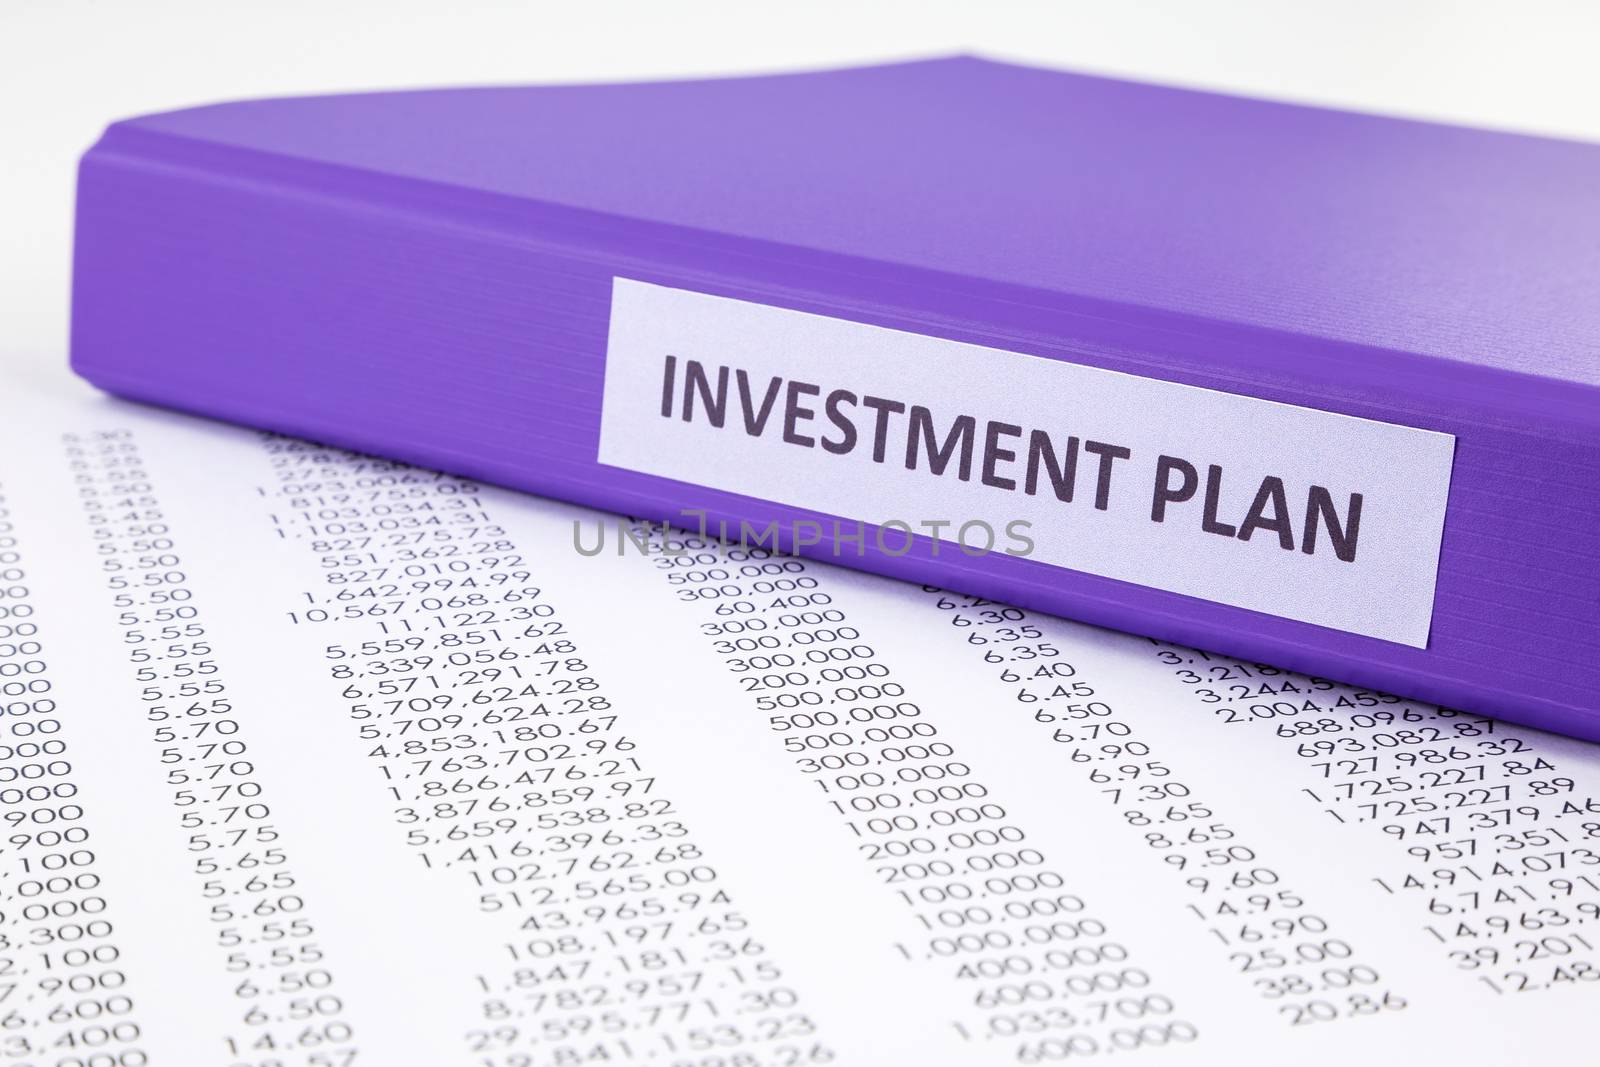 Financial report document with purple binder of investment plan, concept to financial accounting